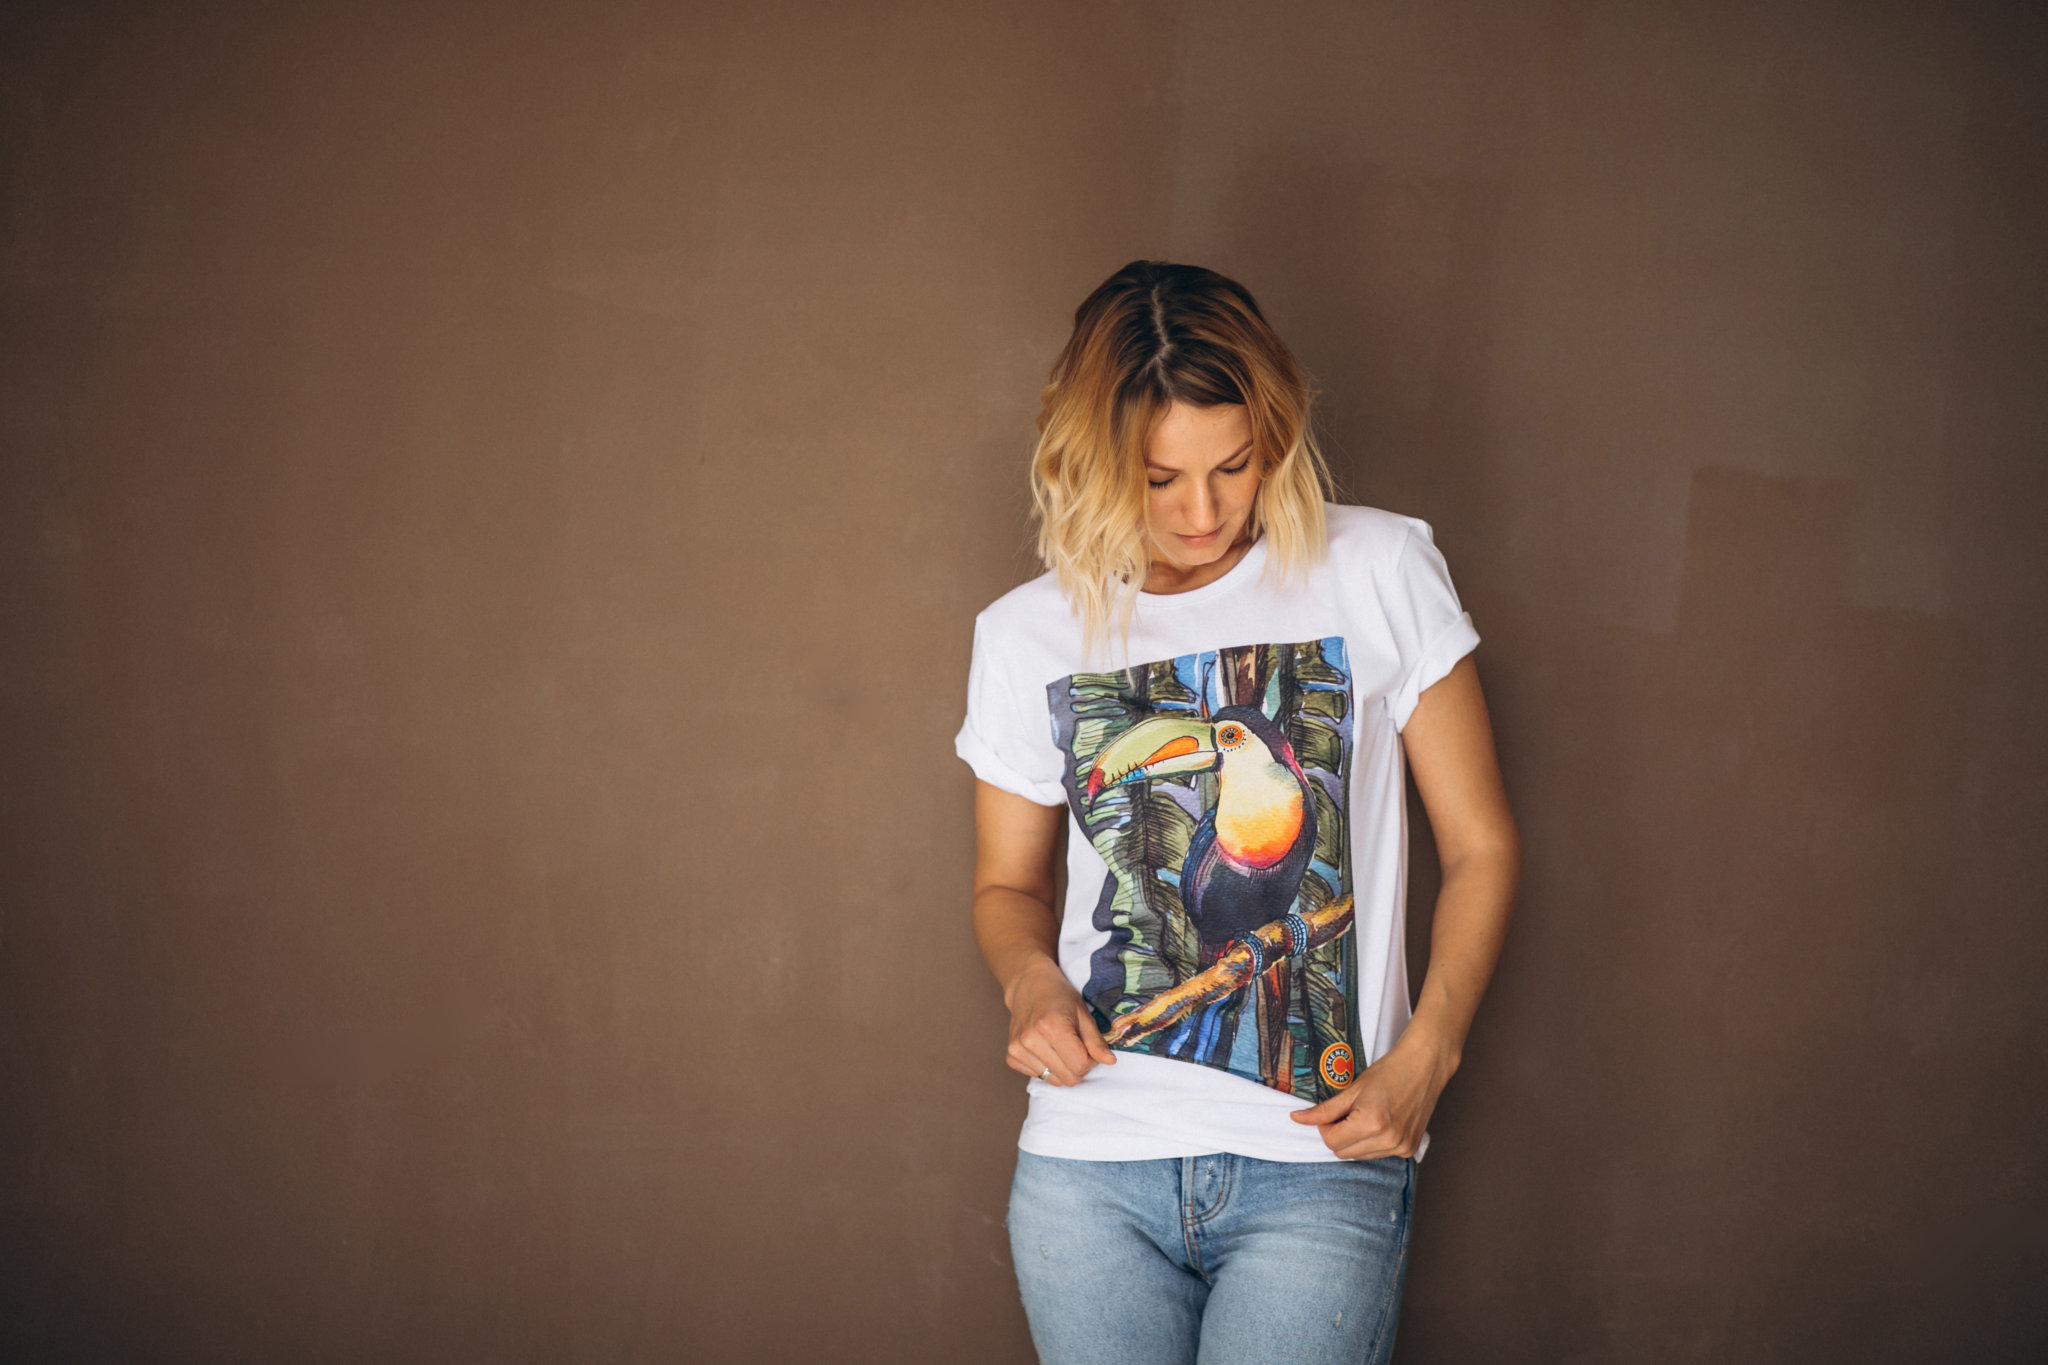 a blonde woman wearing a white shirt with a printed art of a bird.